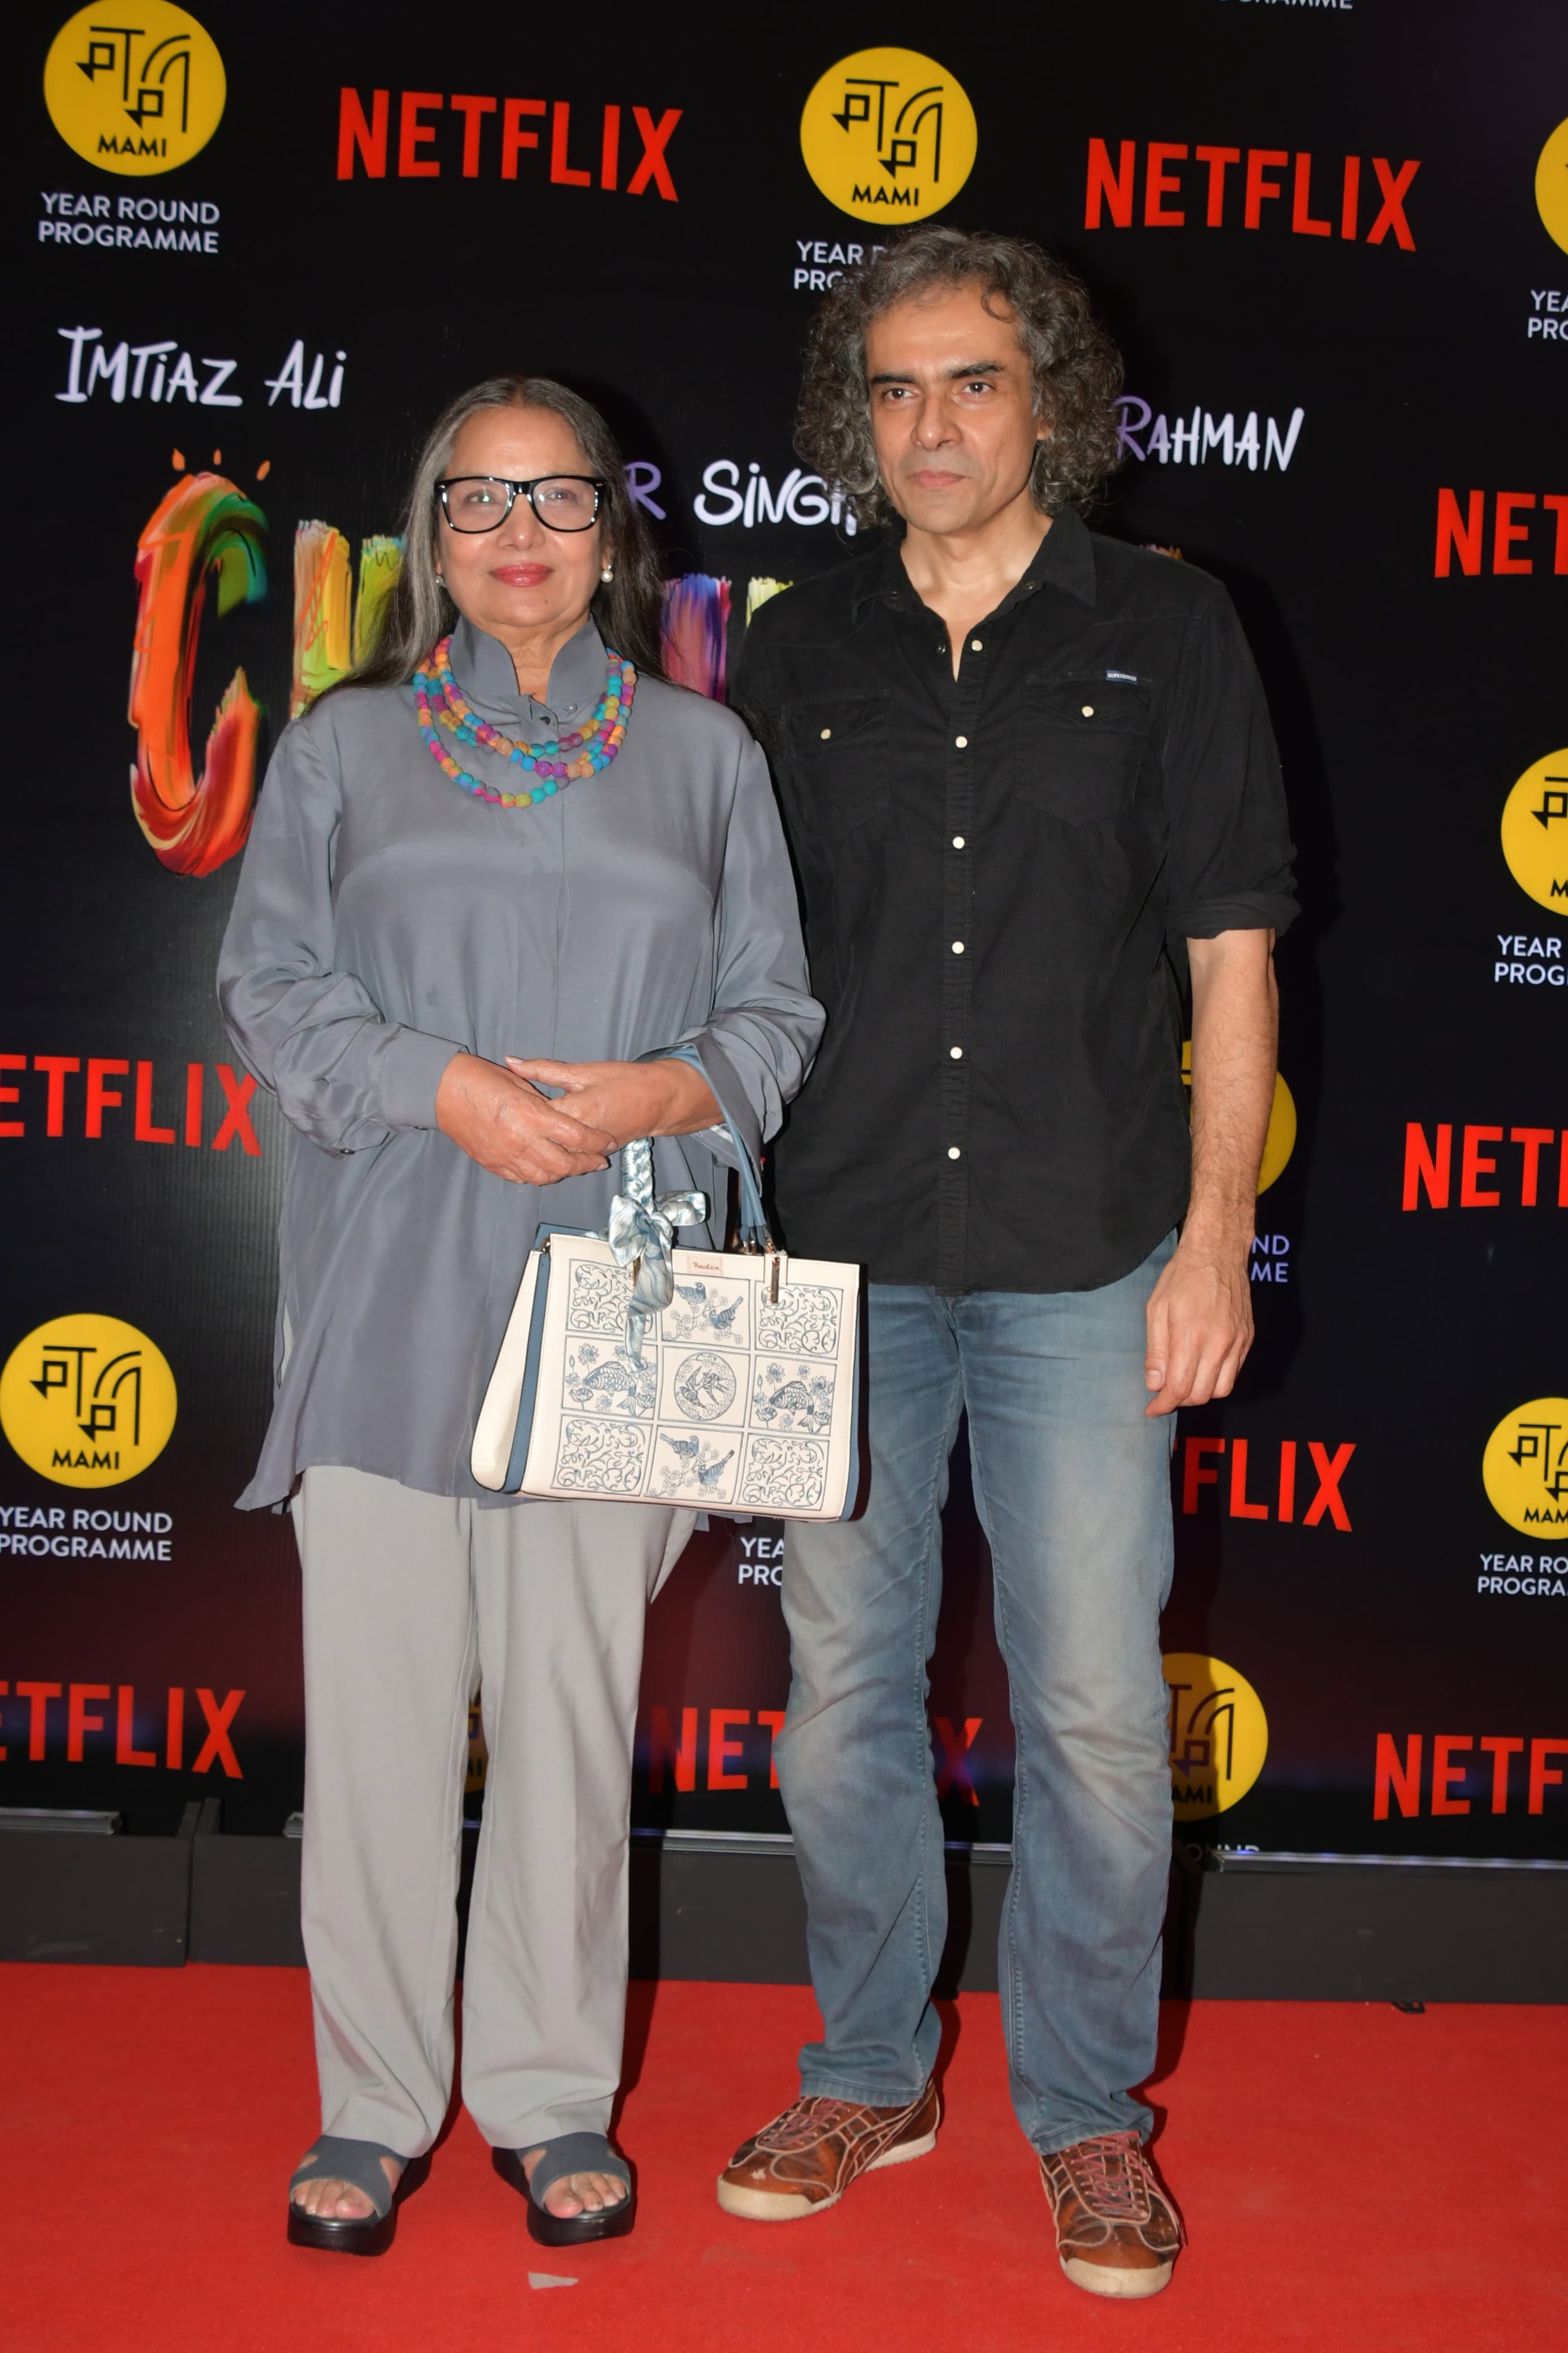 Imtiaz Ali posed with veteran actress Shabana Azmi at the red carpet of the event